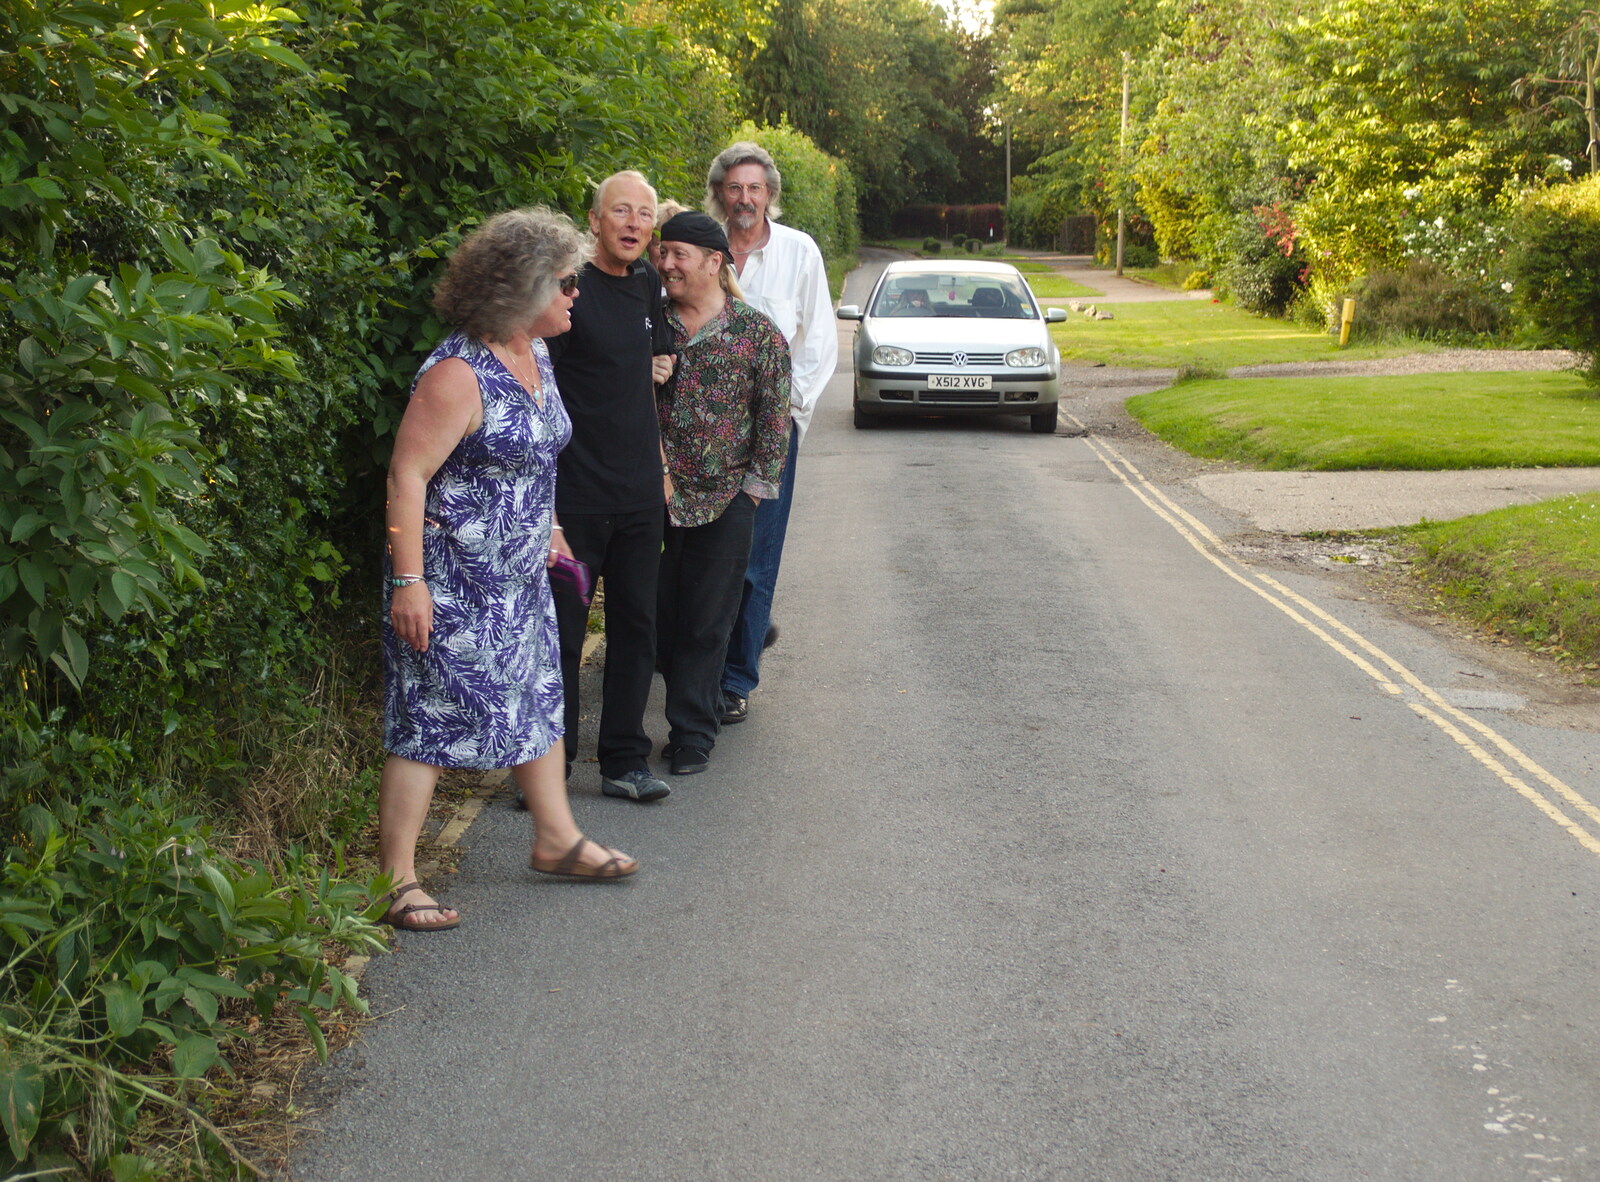 The band hides in the hedge for a passing car from The BBs at Diss Rugby Club, Bellrope Lane, Roydon, Norfolk - 7th June 2014